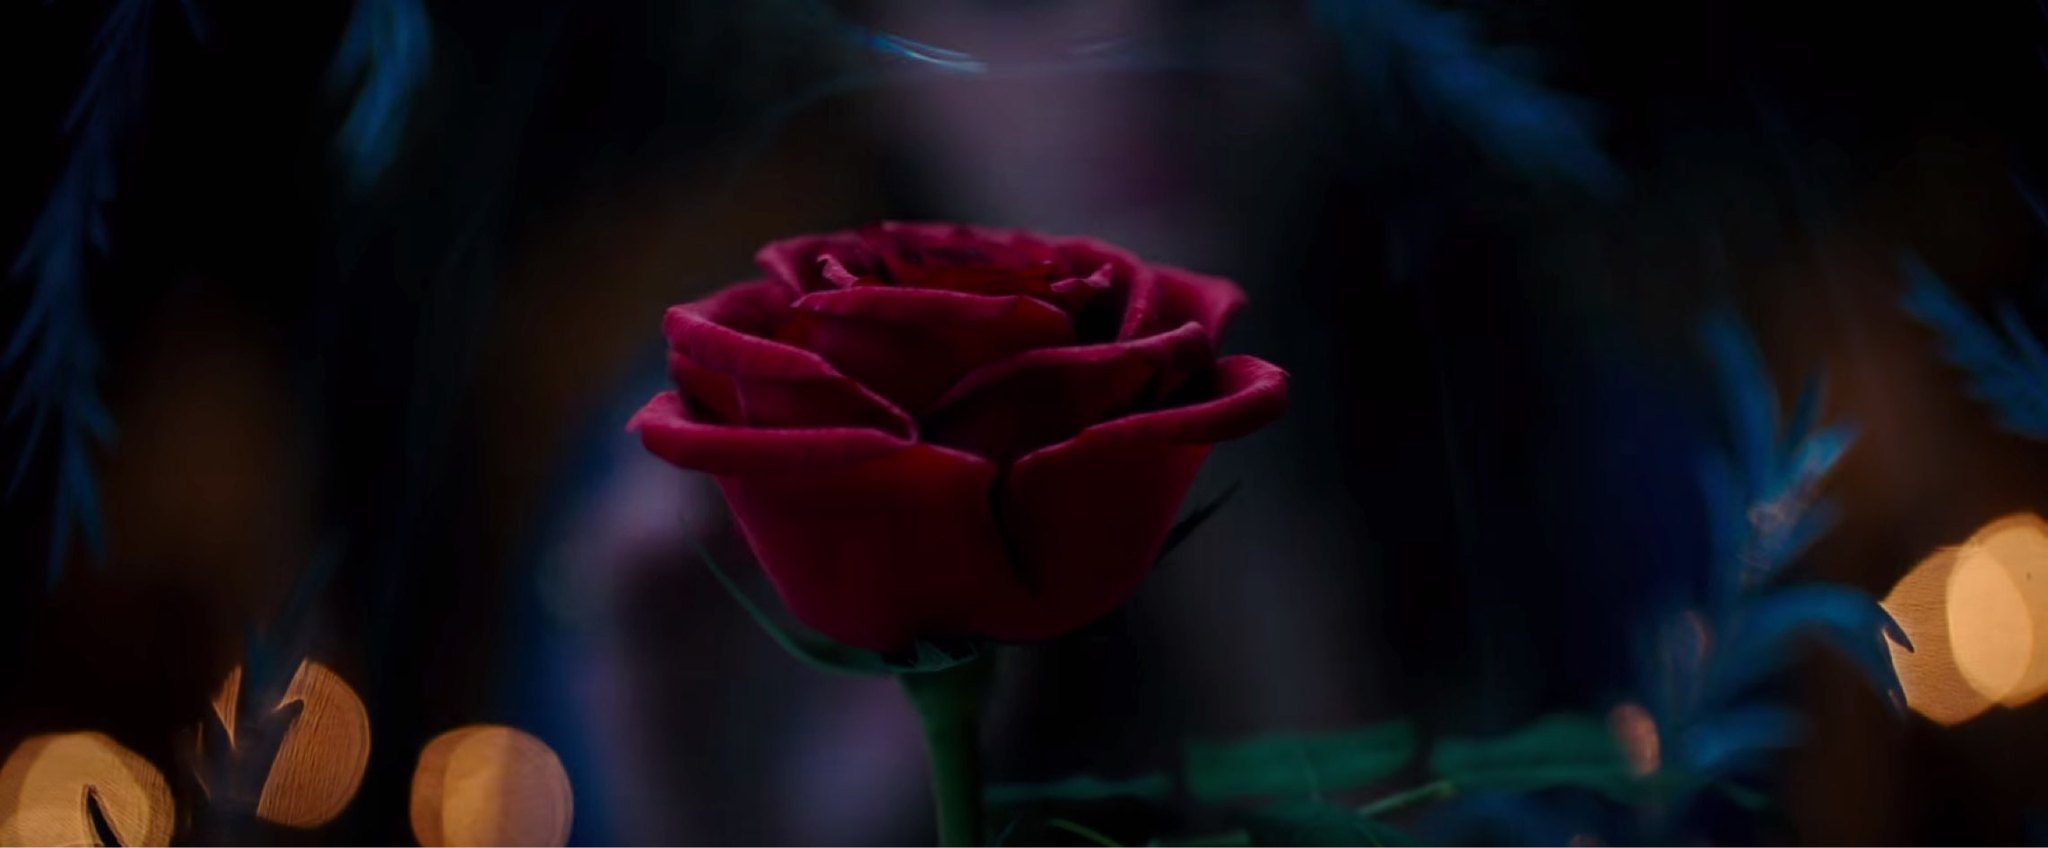 Disney's Live-Action Beauty and the Beast Teaser Trailer